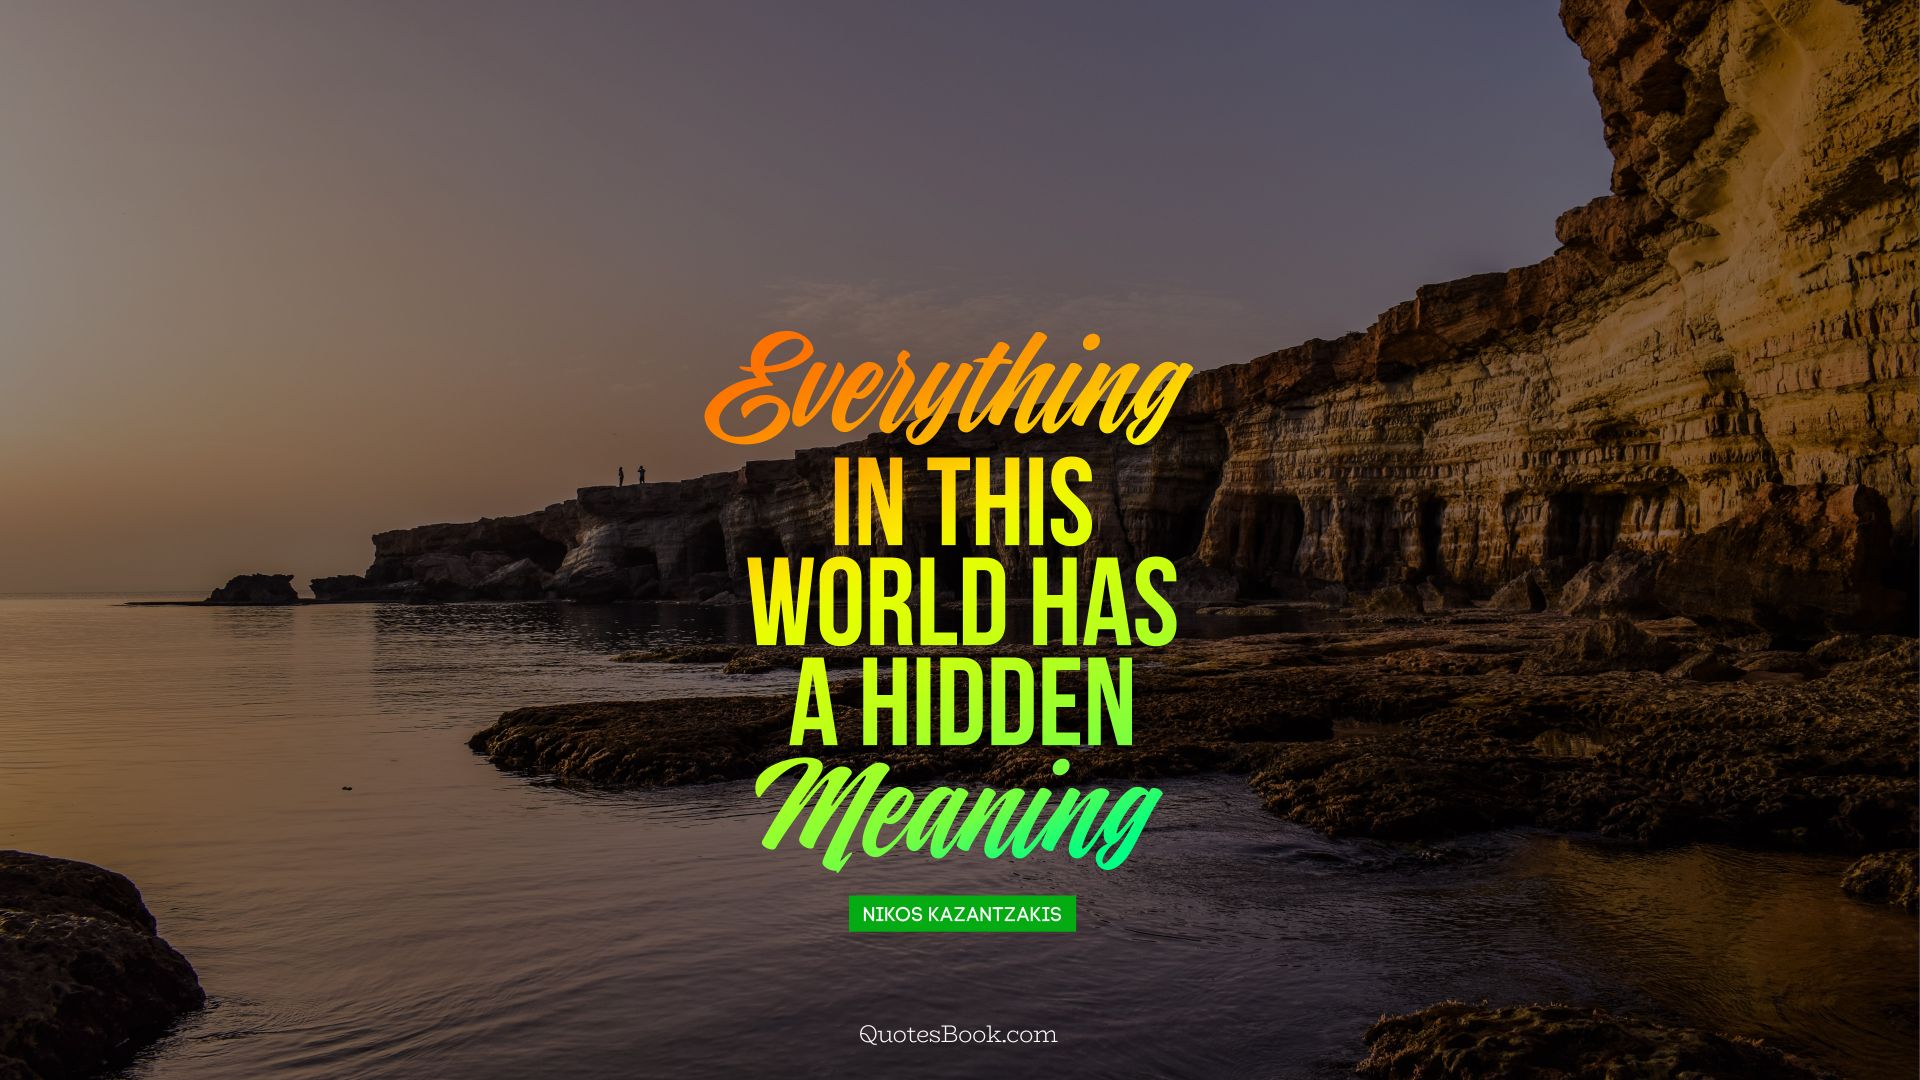 Everything in this, world has a hidden meaning. - Quote by Nikos Kazantzakis